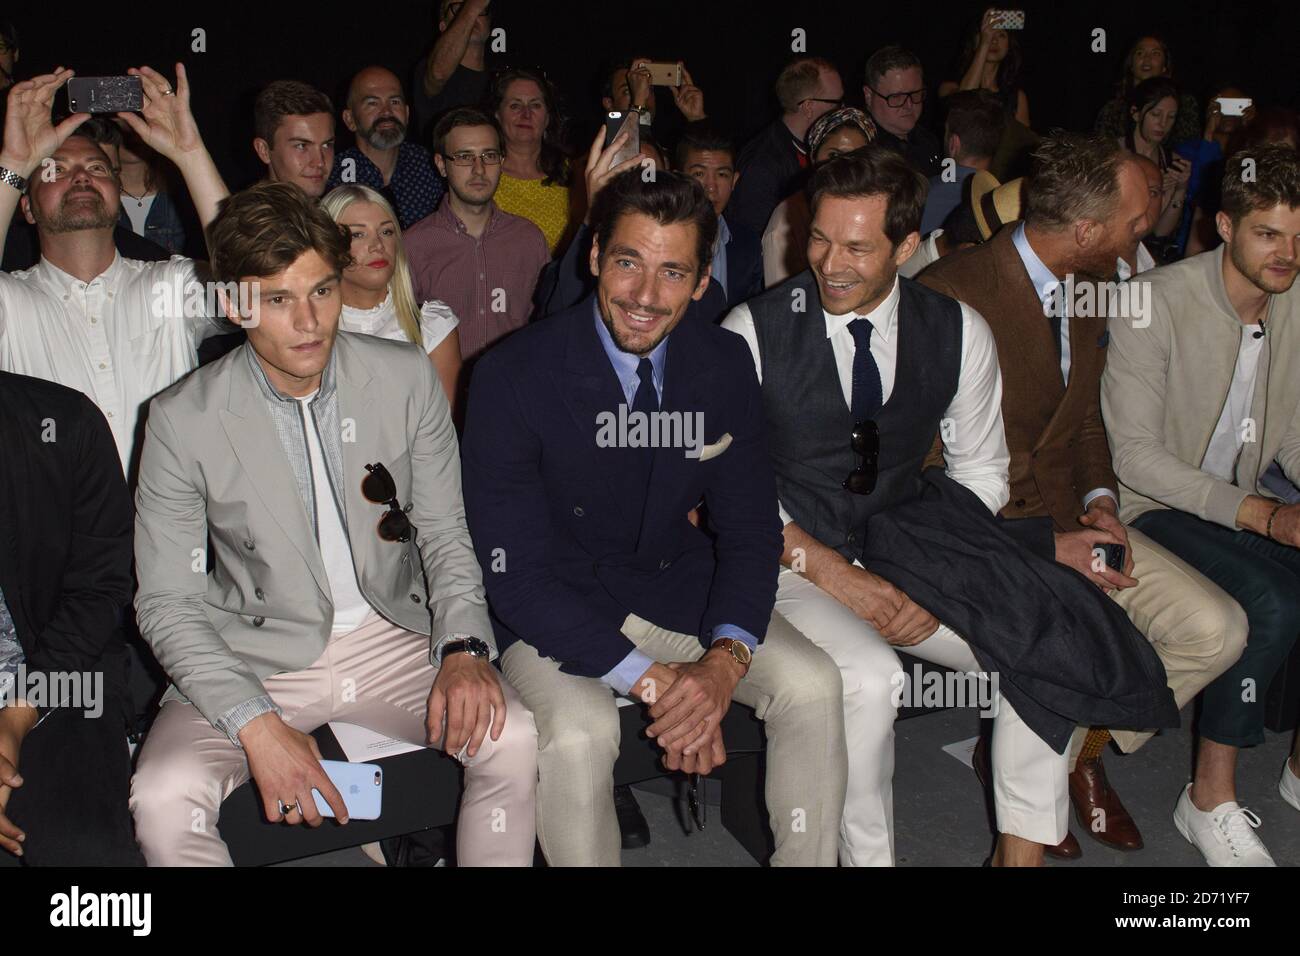 Oliver Cheshire, David Gandy and Paul Sculfor at the Top Man Design fashion show, held at the University of Westminster in London as part of London Collections: Men. Stock Photo